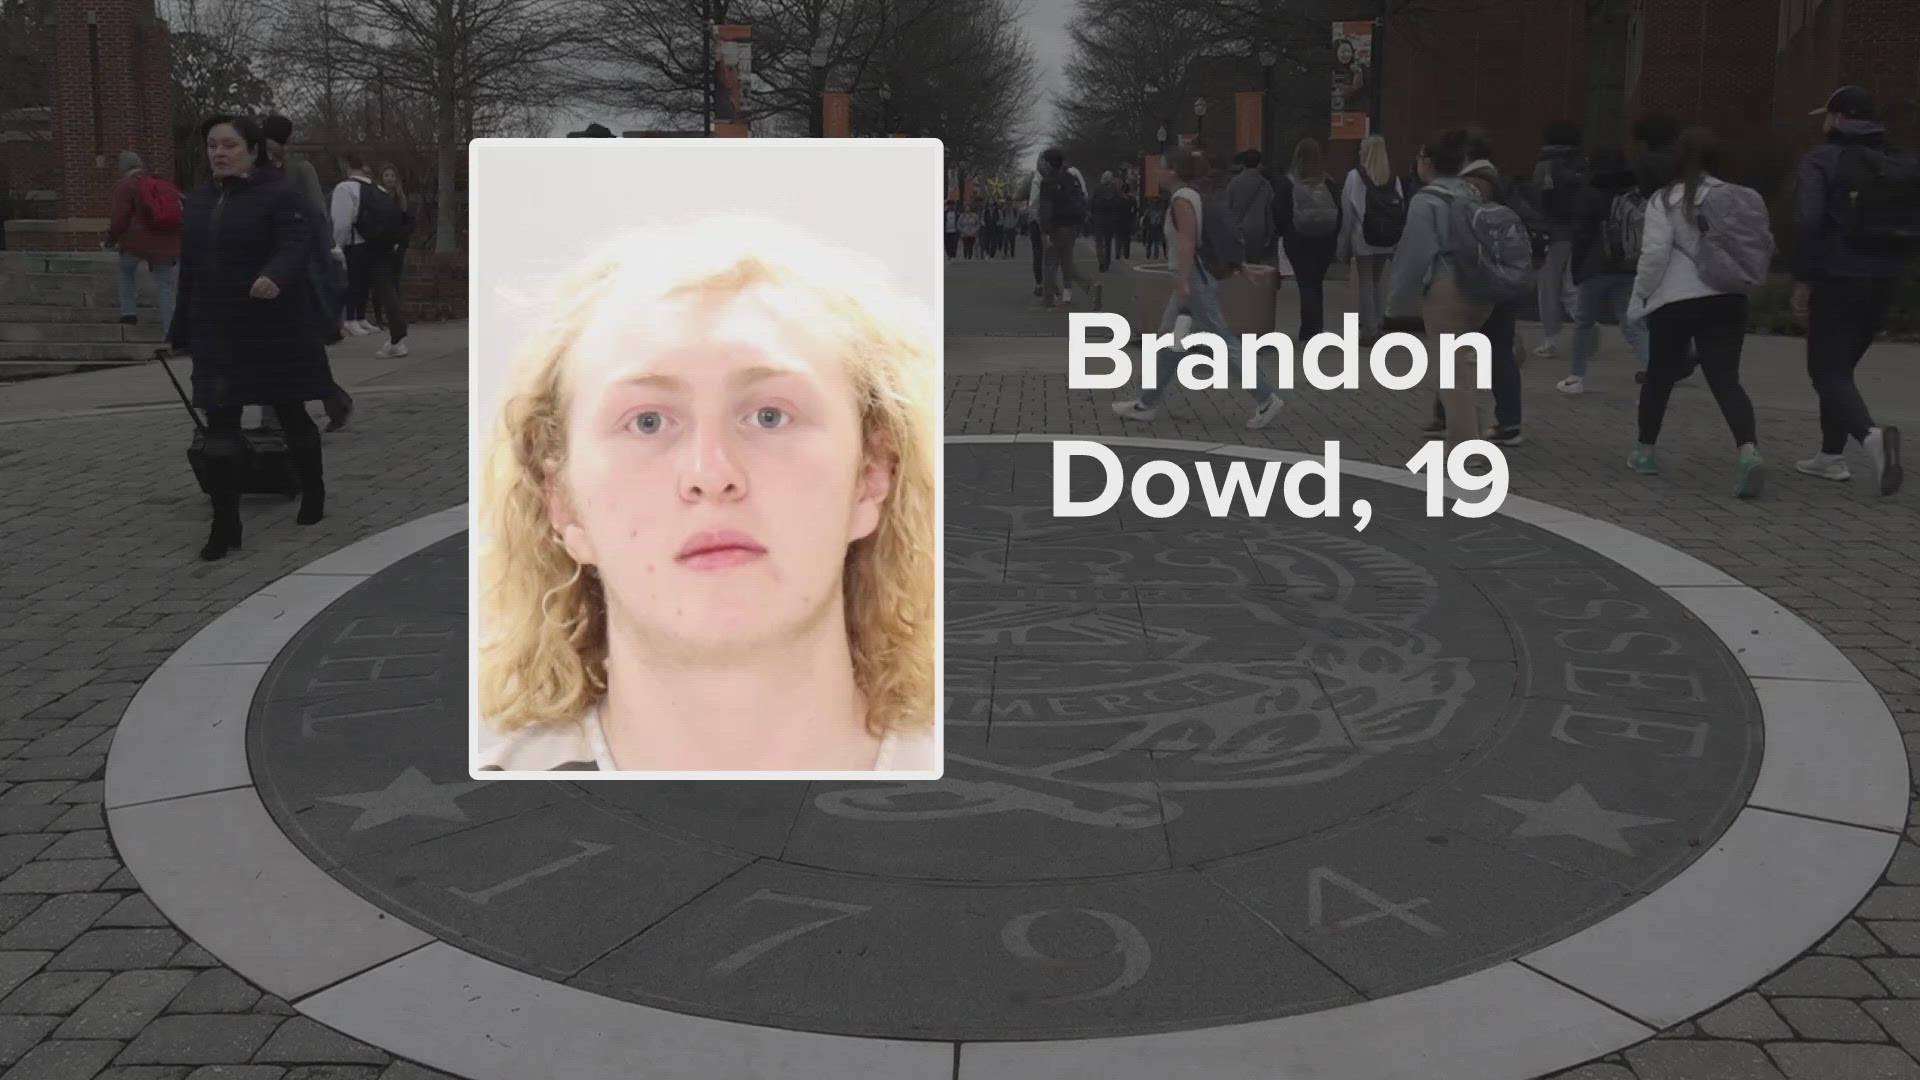 Brandon Dowd, 19, faces arraignment for carrying a weapon on school property on April 4.